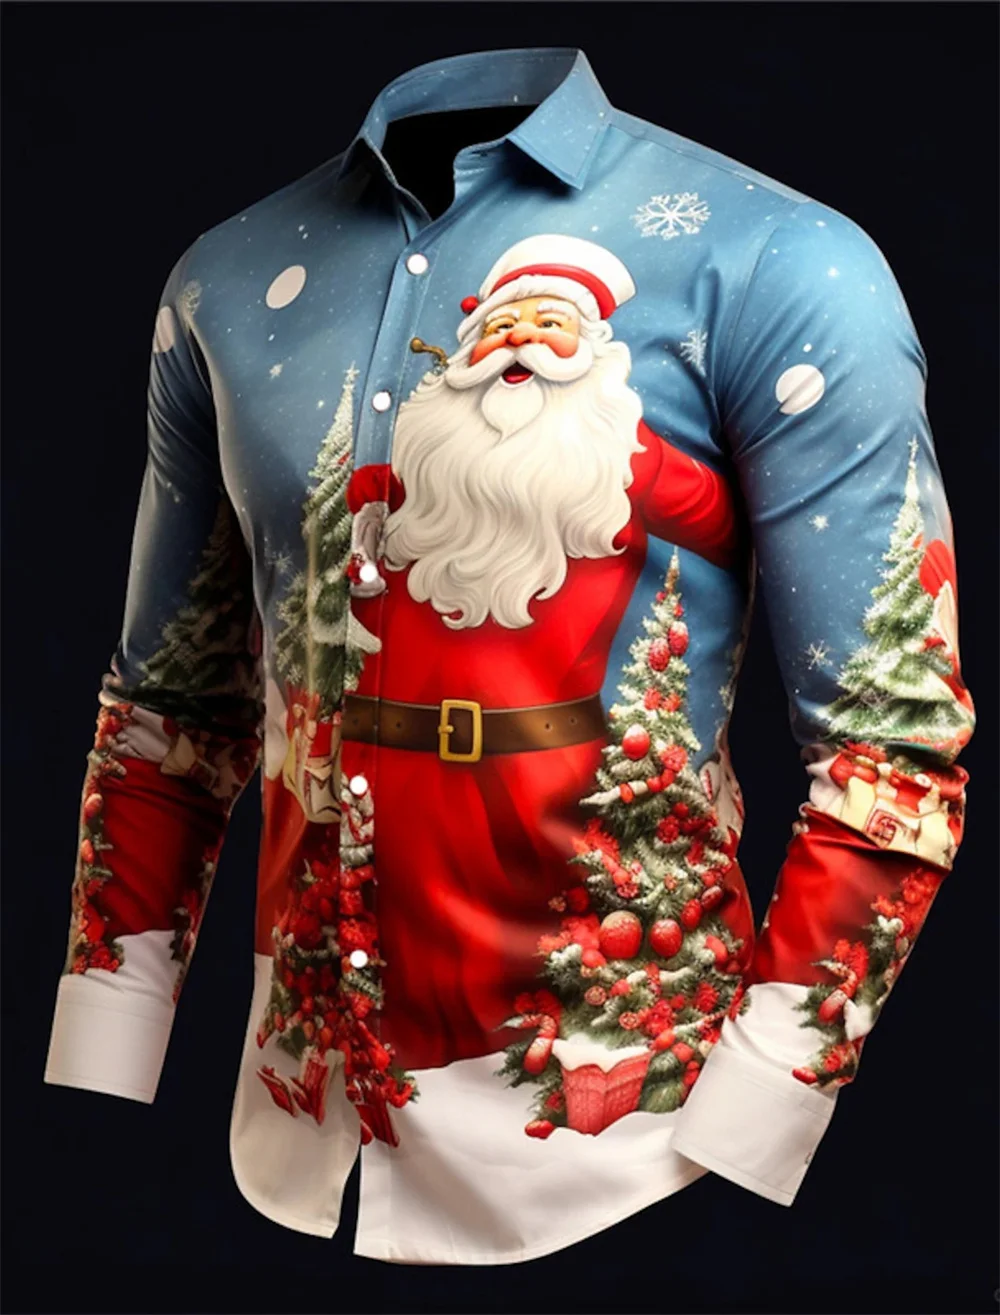 New Men's Party Shirt Christmas Tree Long Sleeve Button Shirt Men's Street High Quality Top Plus Size Santa Claus Shirt earrings christmas santa claus beading earrings in multicolor size one size